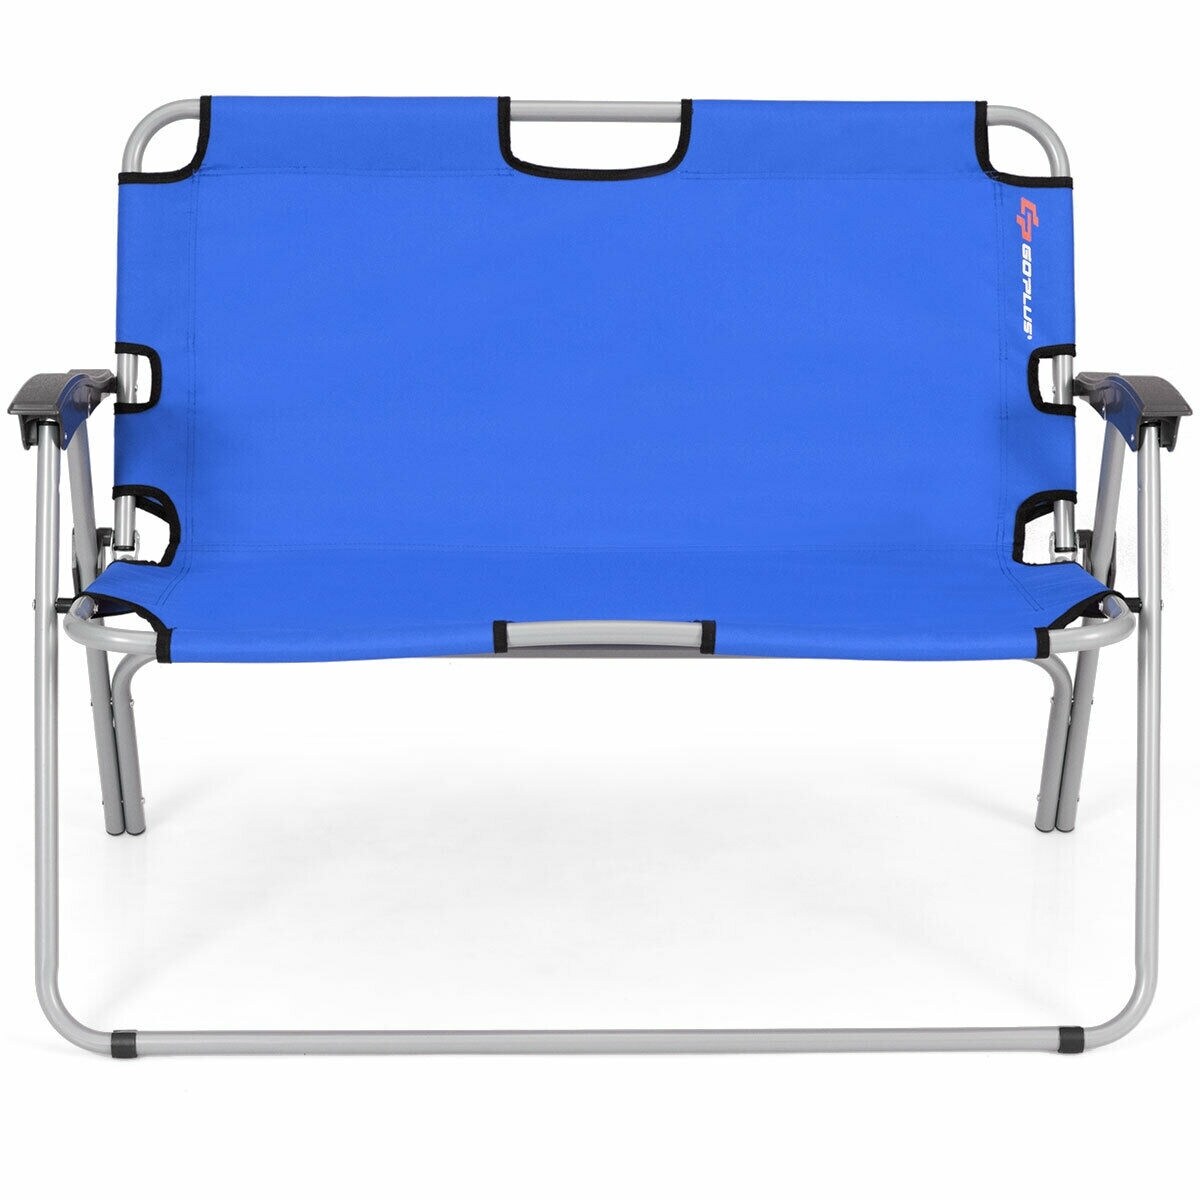 2 person folding camping bench portable double chairblue